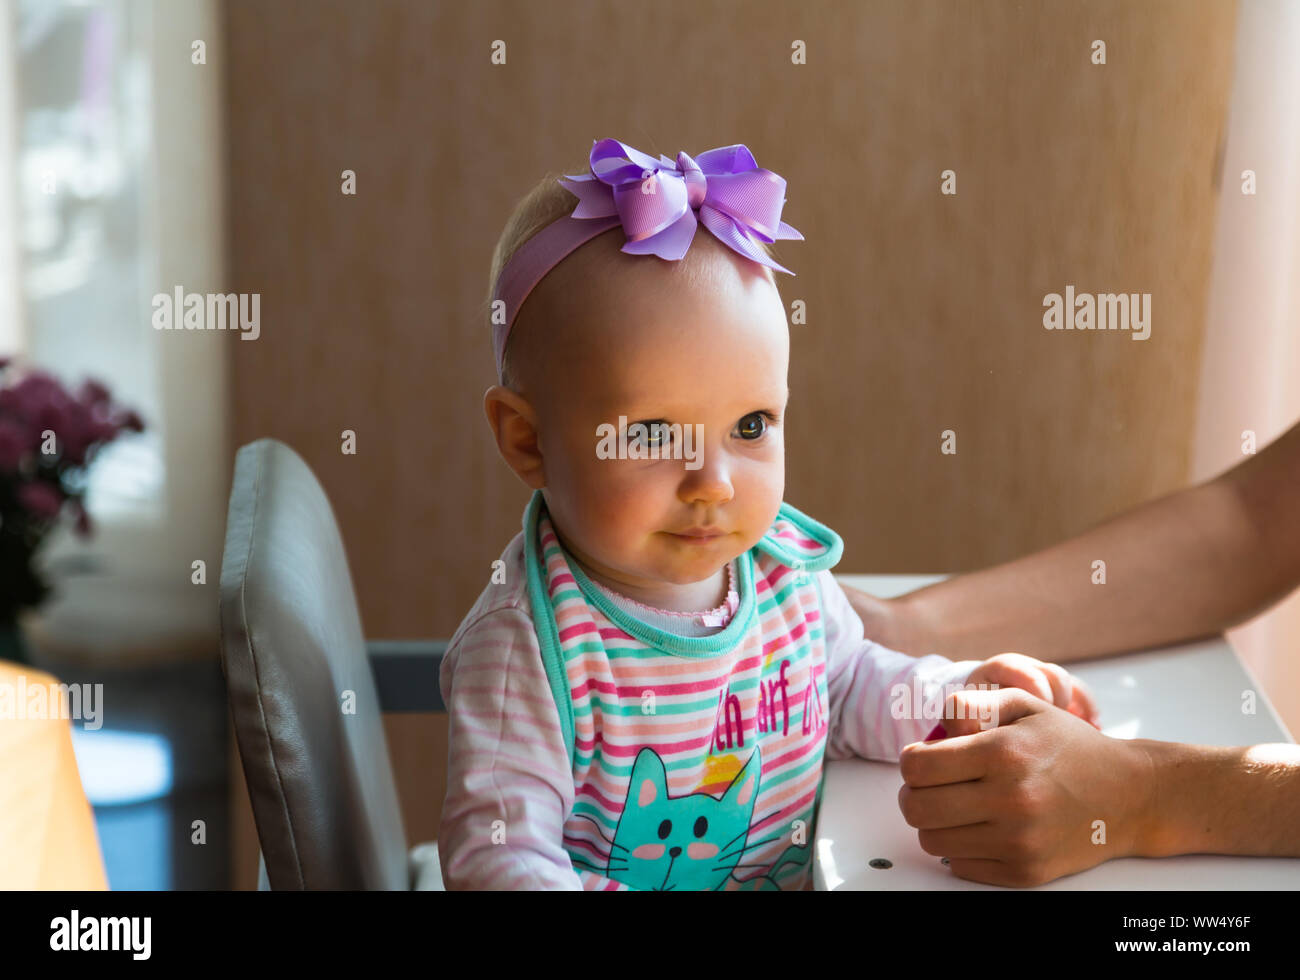 One year old baby Stock Photo